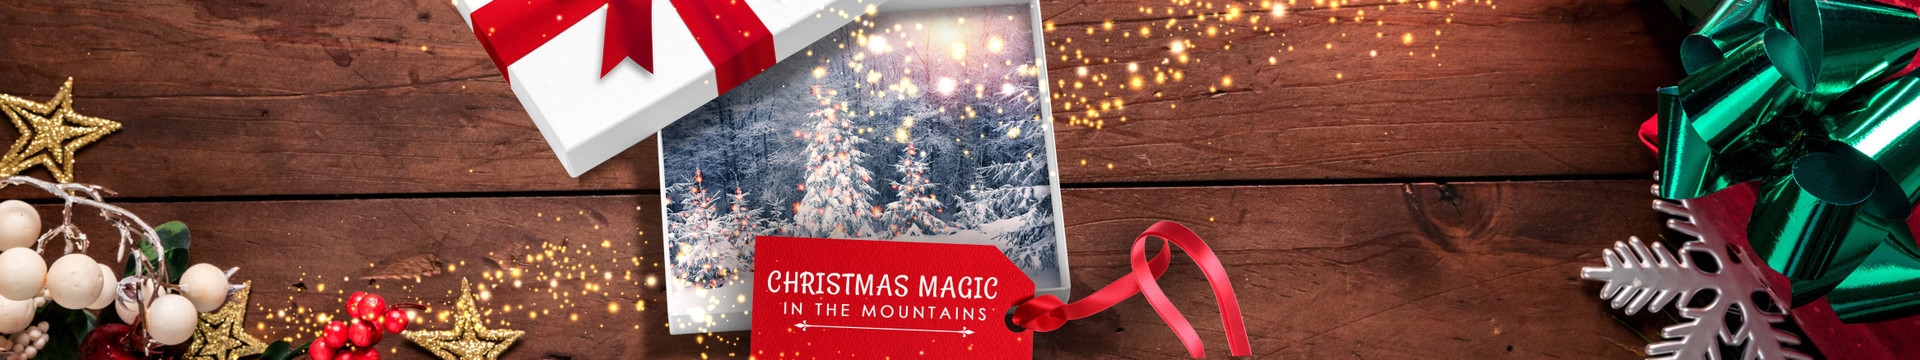 Christmas Magic in the Mountains | Westgate Sports & Entertainment